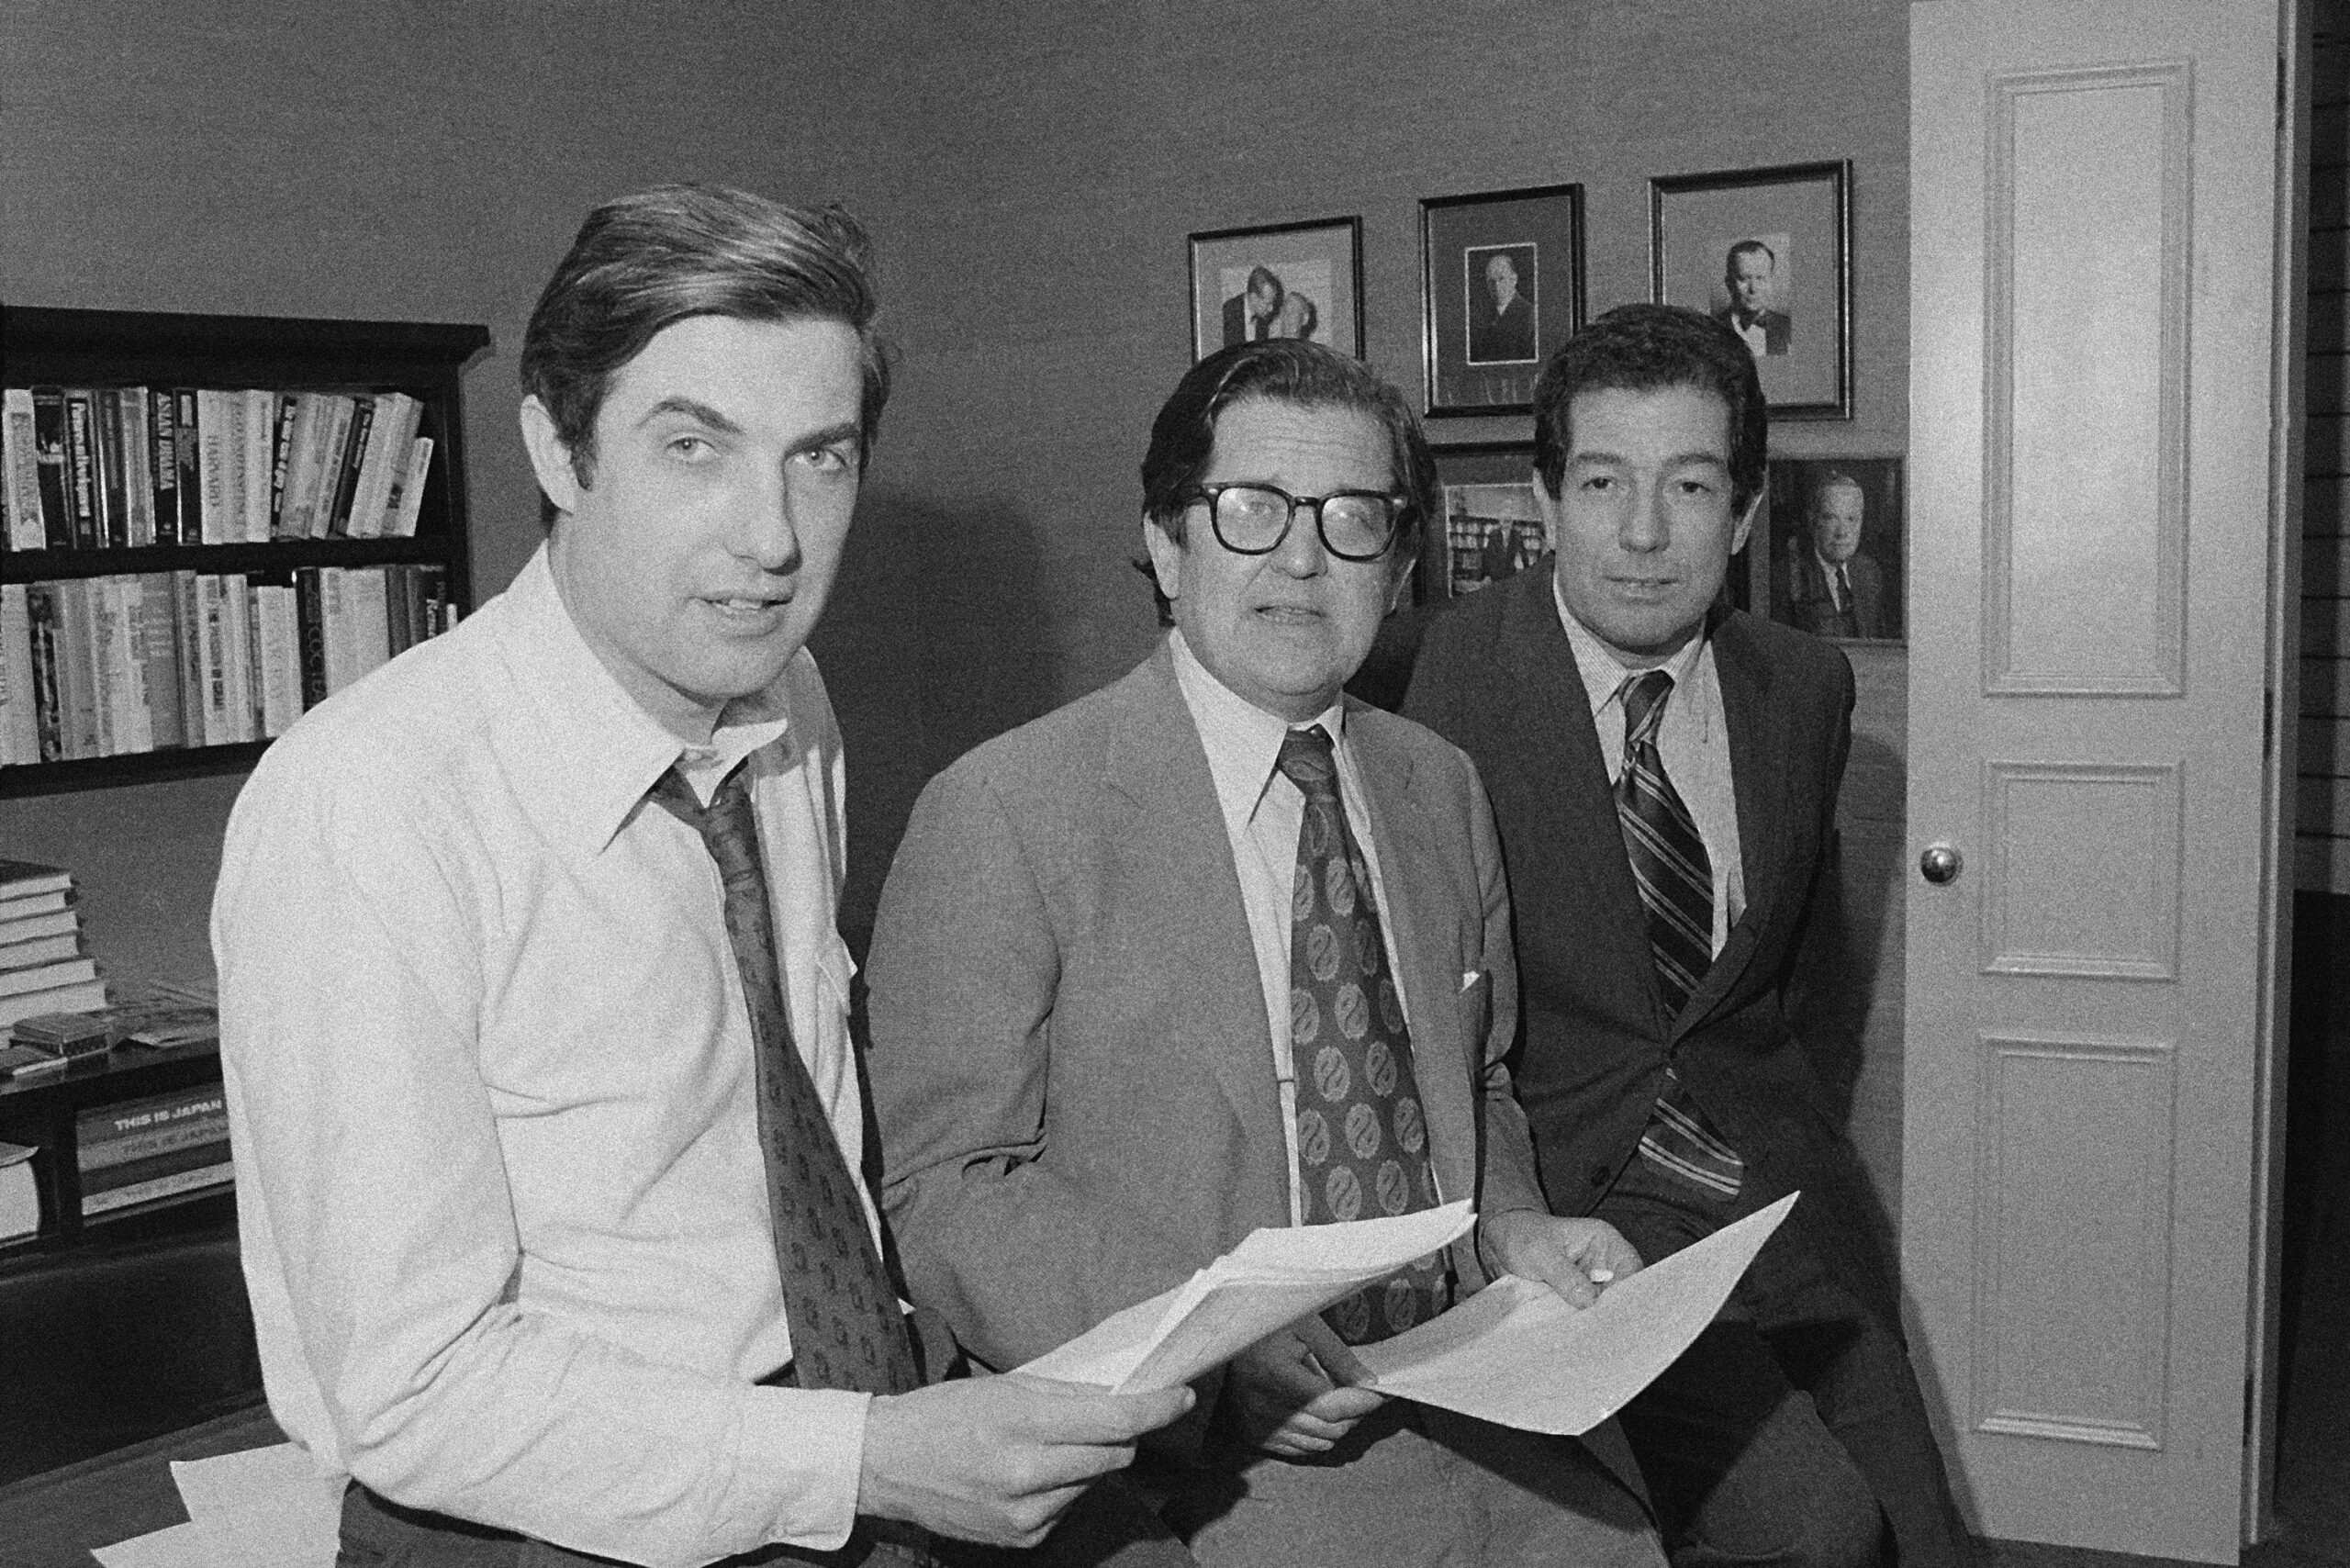 New York Times Co. v. United States (1971), also called the "Pentagon Papers" case, defended the First Amendment right of free press against prior restraint by the government. In this photo, (from left) Reporter Neil Sheehan, Managing Editor A.M. Rosenthal and Foreign News Editor James L. Greenfield are shown in an office of the New York Times in New York, May 1, 1972, after it was announced the team won the Pulitzer Prize for public service for its publication of the Pentagon Papers. Sheehan, who obtained and wrote most of the stories about the papers for the Times, was not cited in the award. (AP Photo/John Lent, republished with permission from The Associated Press)